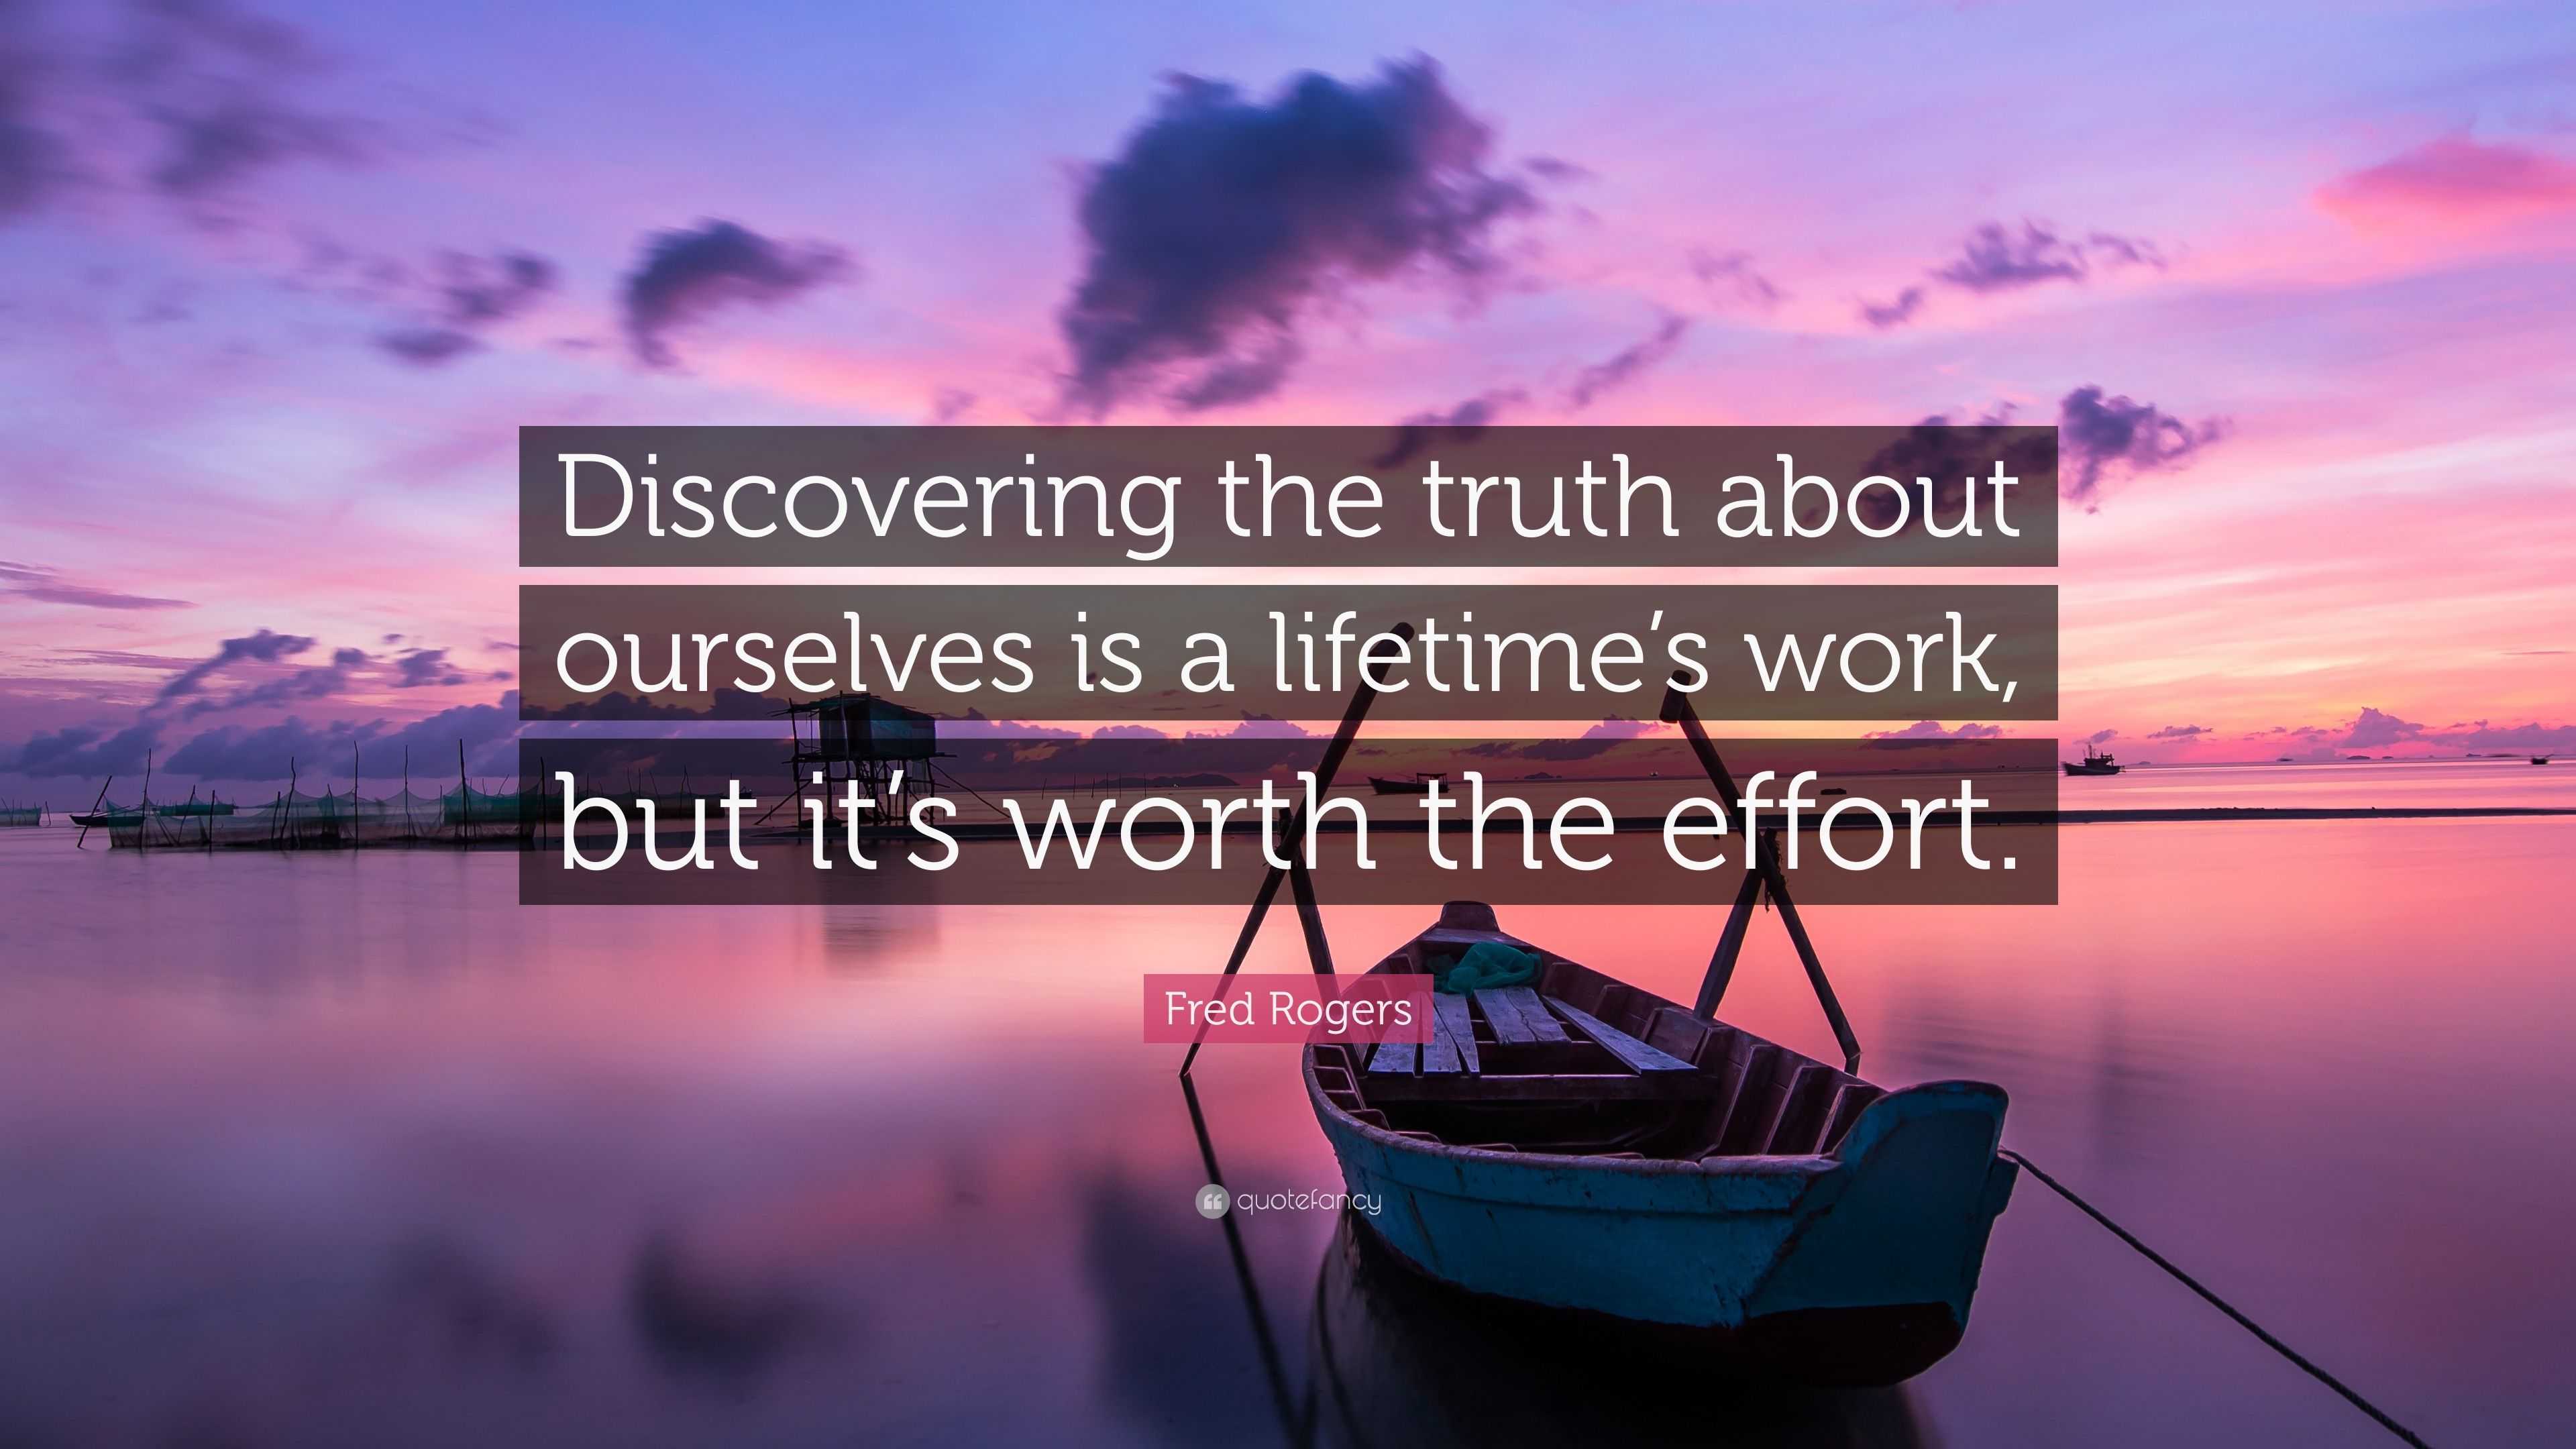 Fred Rogers Quote: "Discovering the truth about ourselves ...